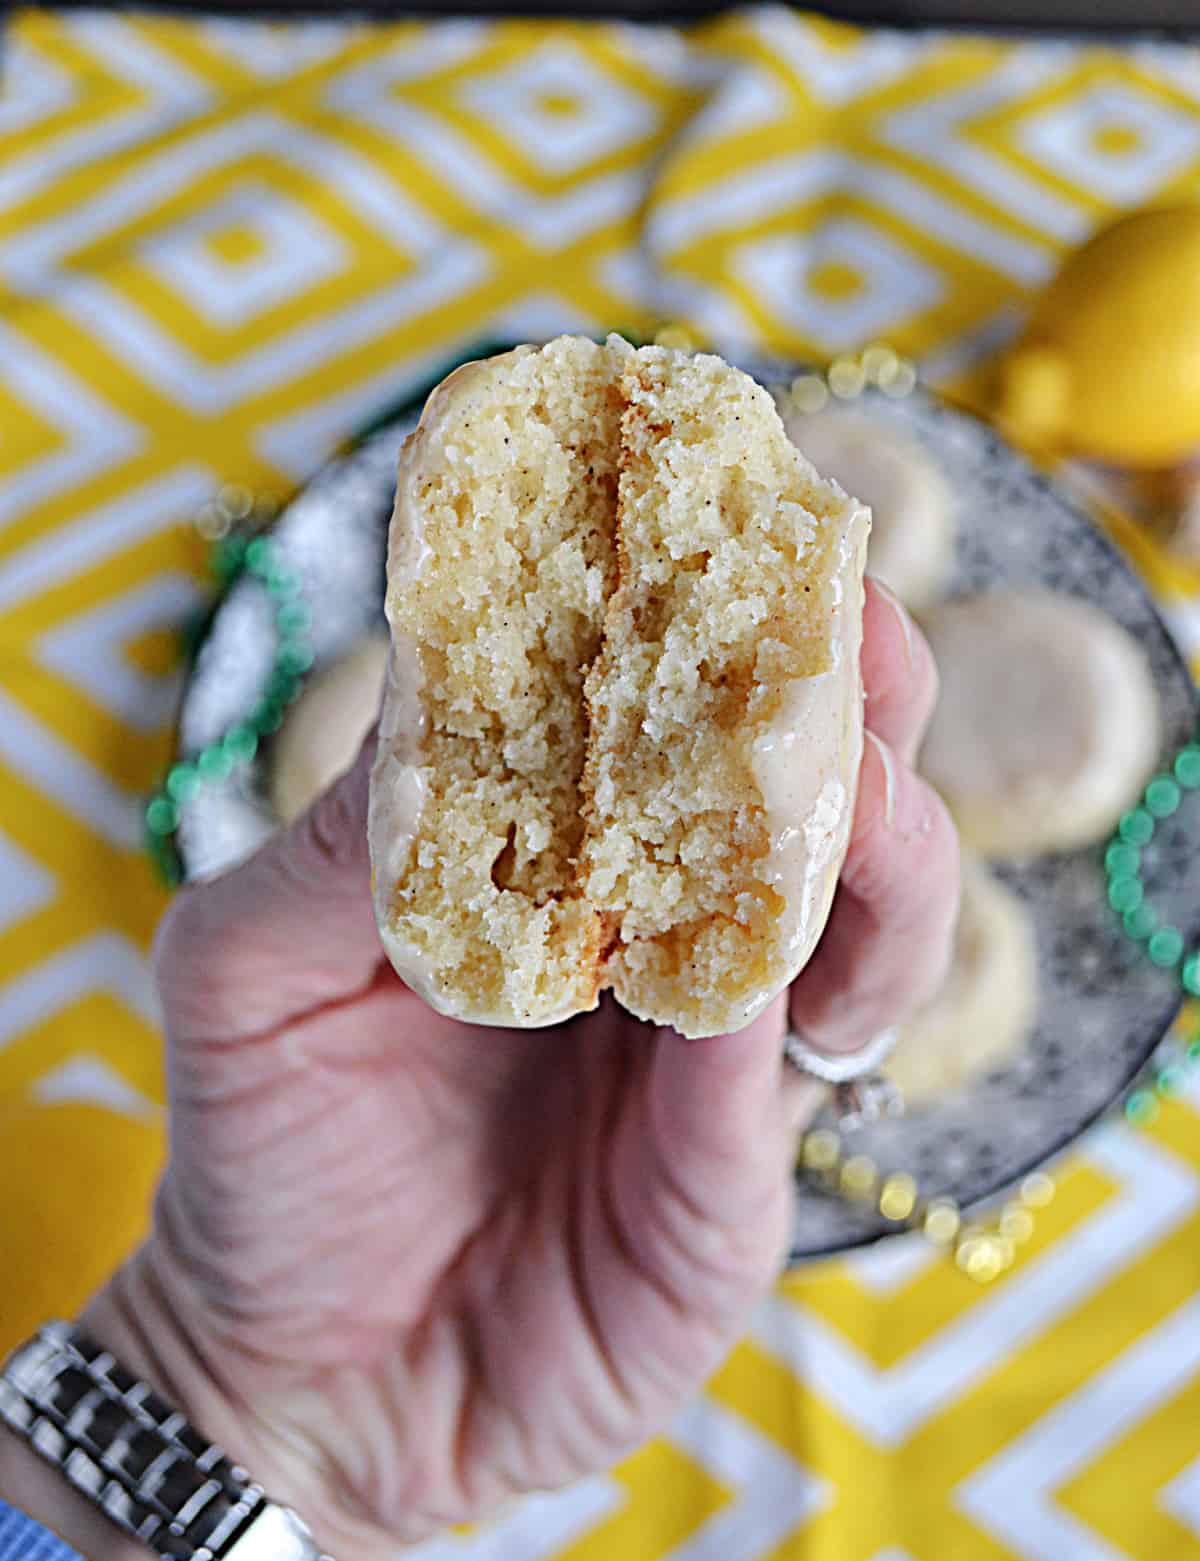 A close up of the inside of a lemon ginger cookie.